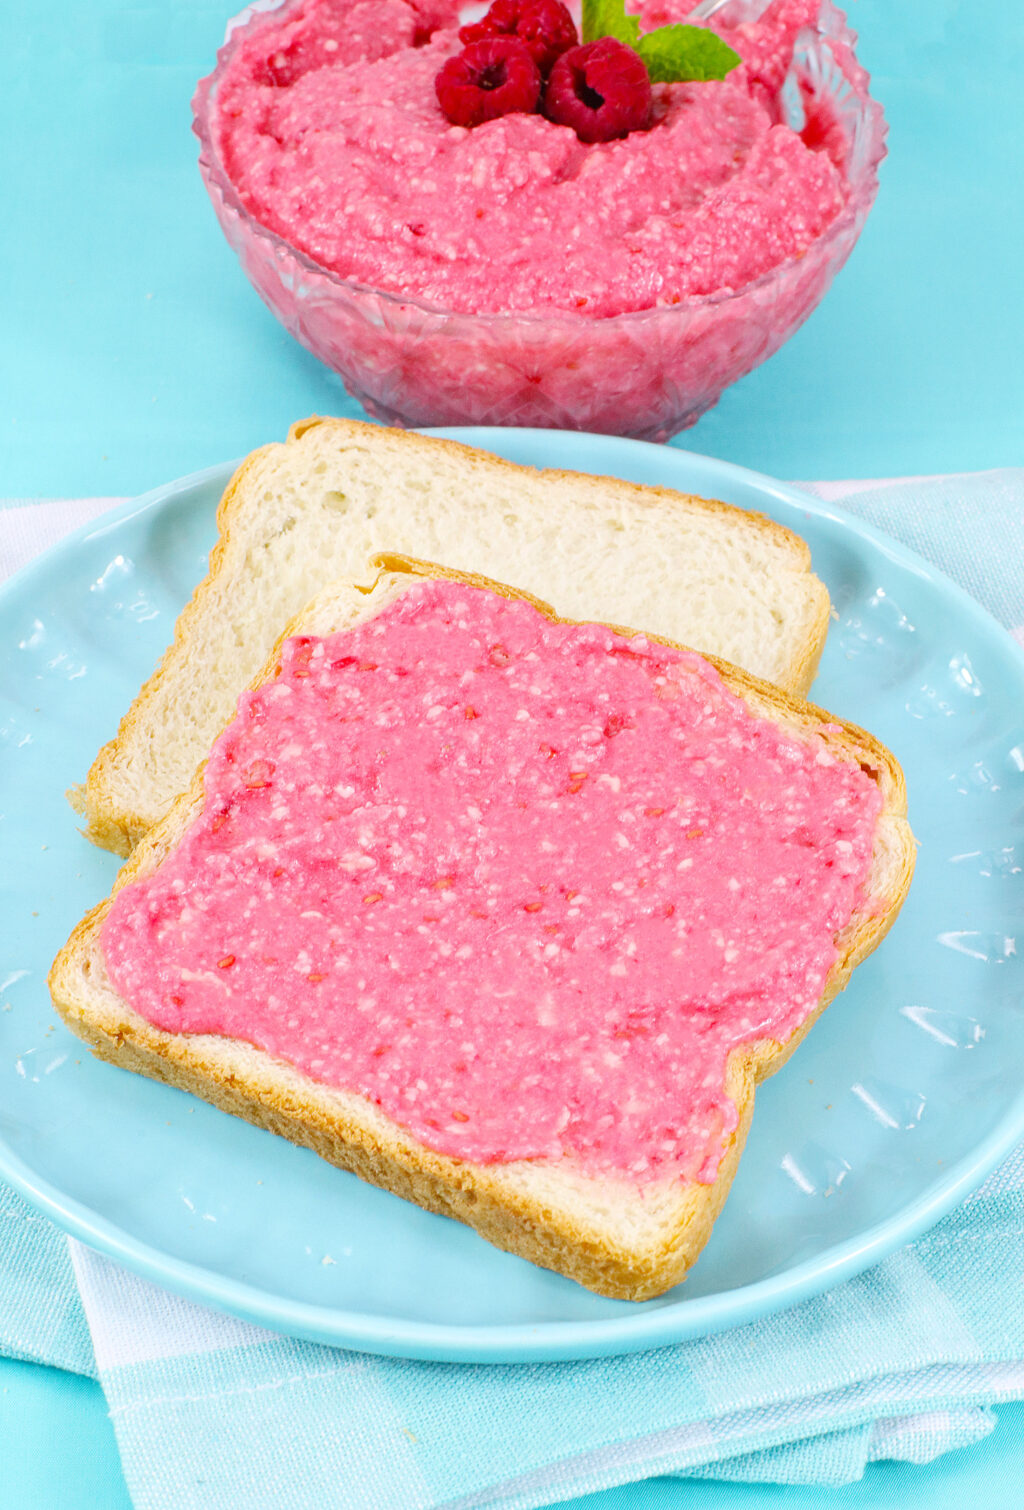 sliced of bread with raspberry butter spread on top